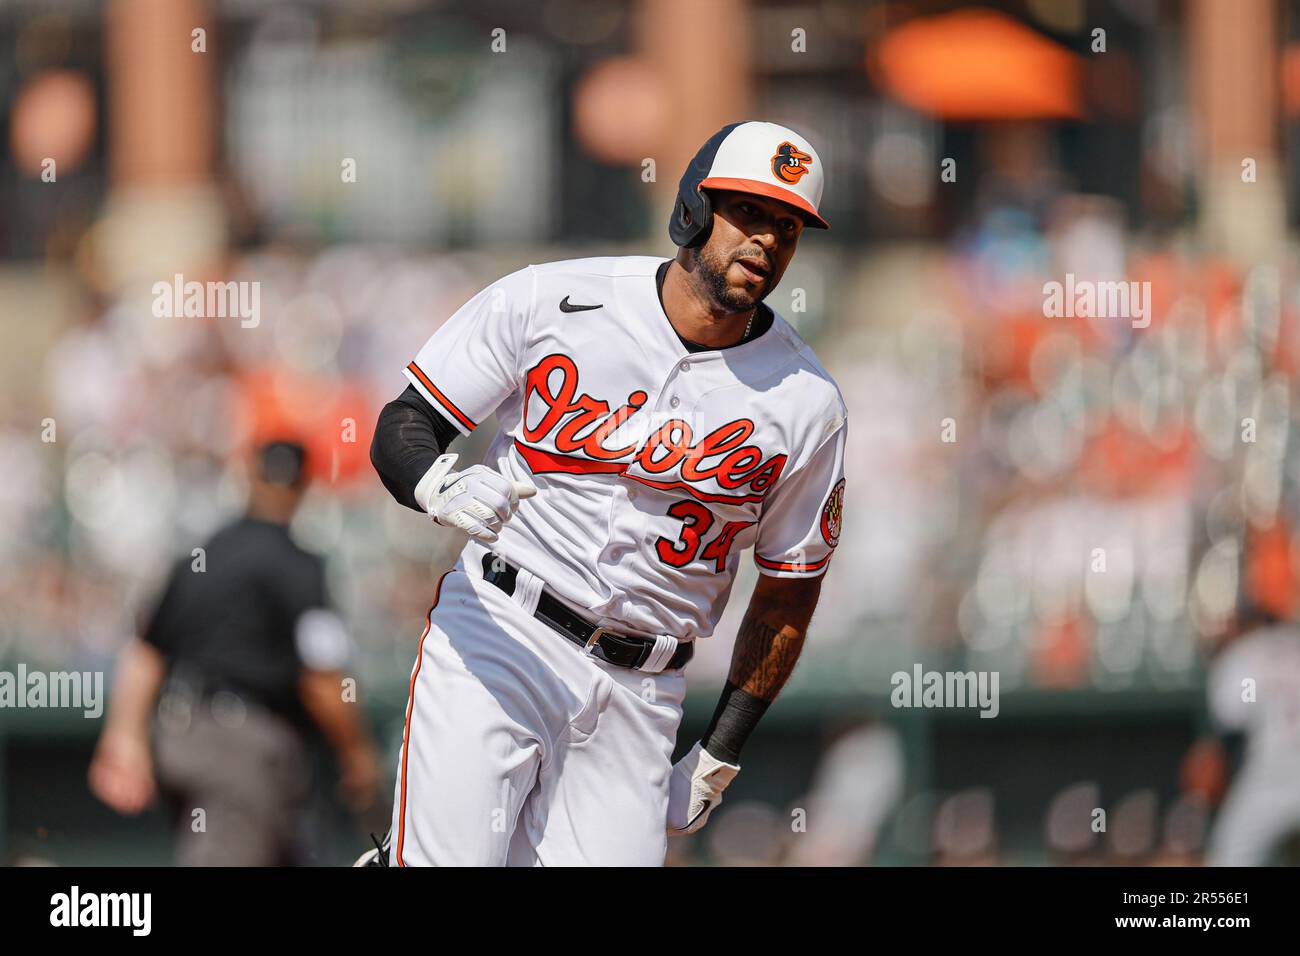 Baltimore, MD, USA; Baltimore Orioles center fielder Aaron Hicks (34)  readies to hit during an MLB game against the Cleveland Guardians on  Wednesday Stock Photo - Alamy